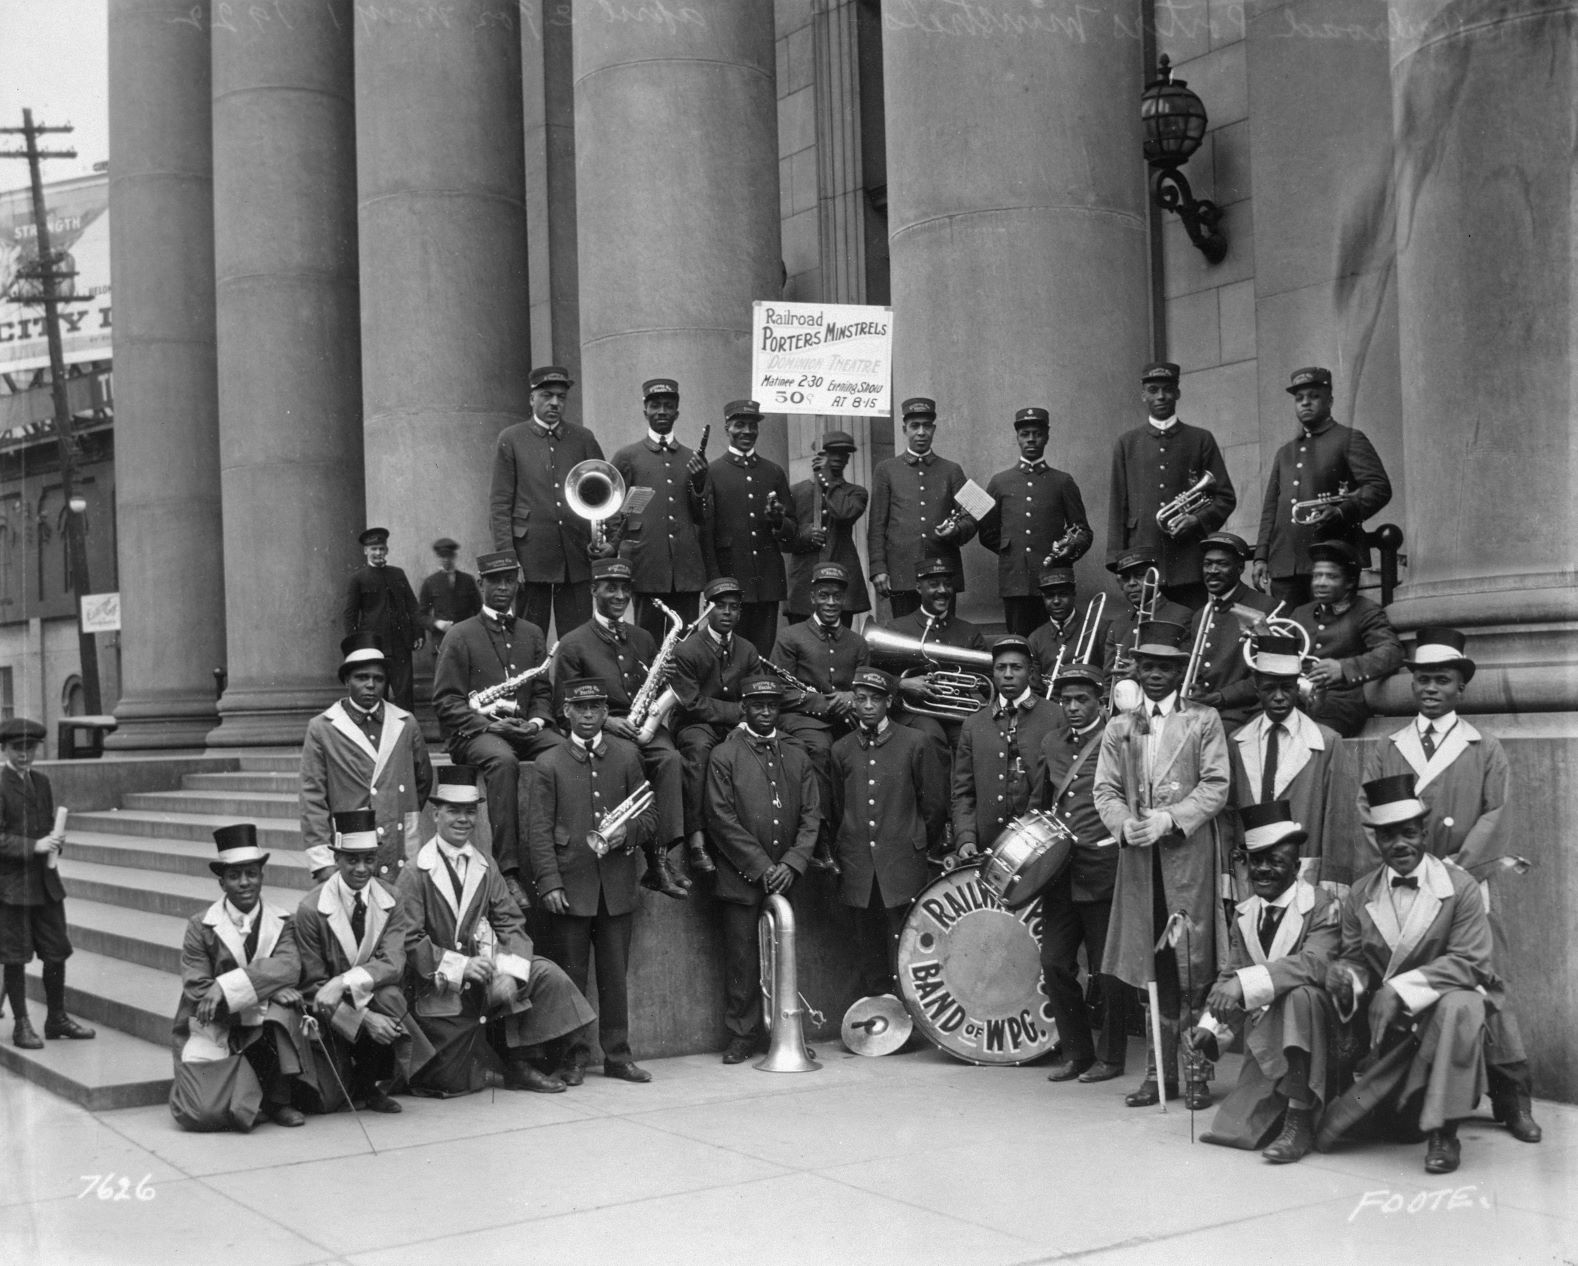 A black and white photograph of a group of Black men in uniform posing for the photo. Many are holding instruments like trumpets, saxophones, tubas, or drums, and some carry batons. In the centre back, one holds up a sign that reads, "Railroad Porters Minstrels / Dominion Theatre".